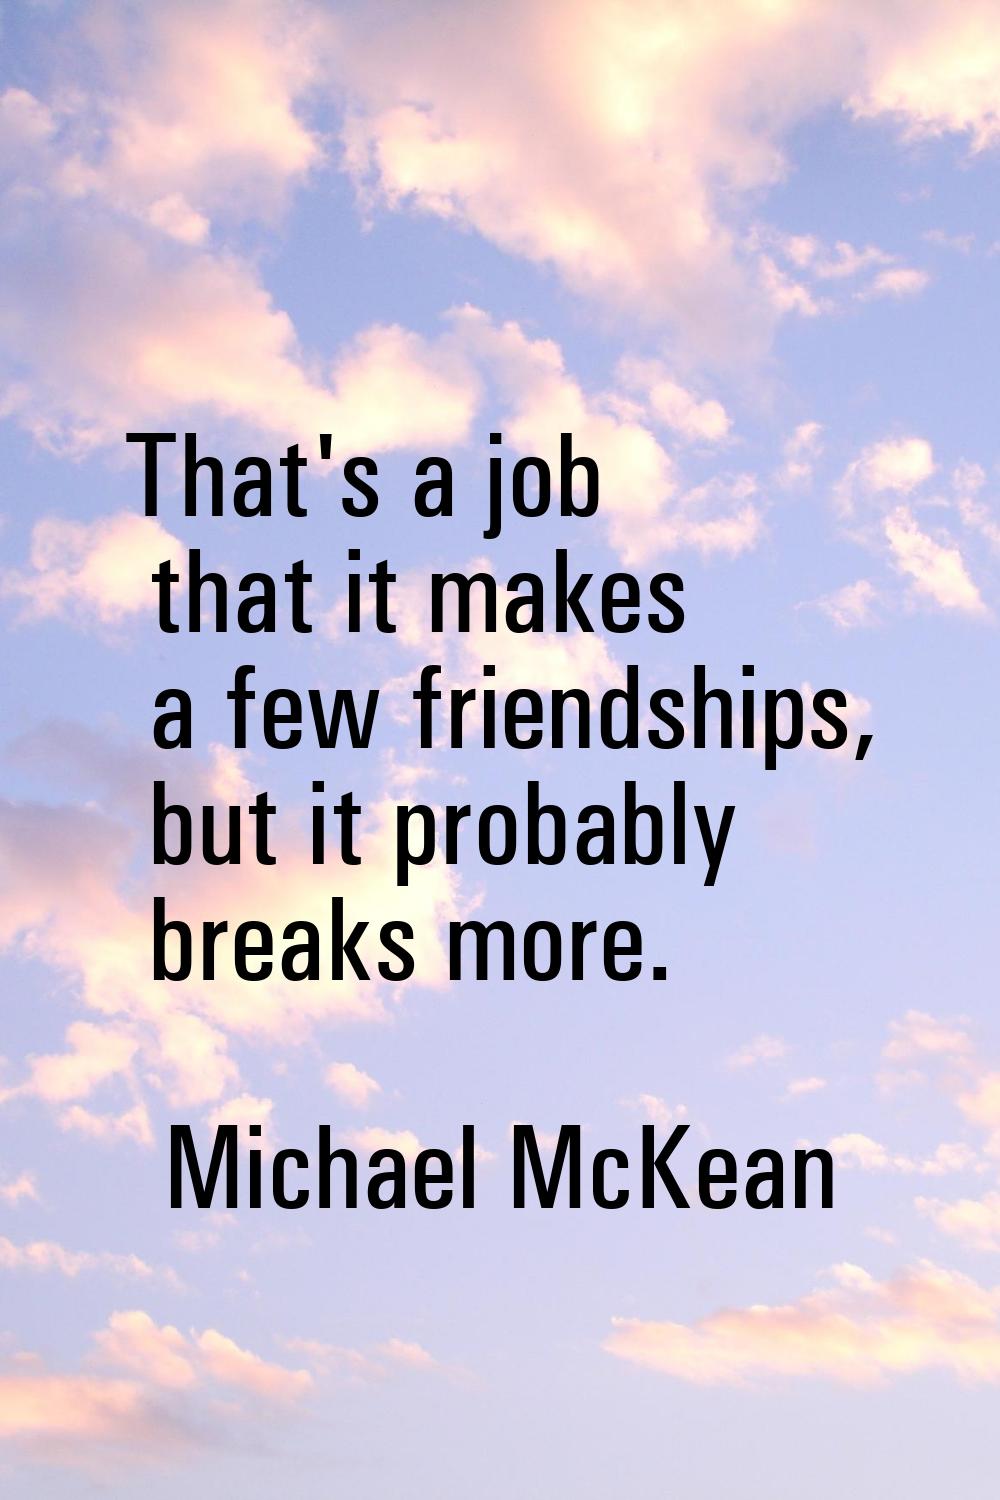 That's a job that it makes a few friendships, but it probably breaks more.